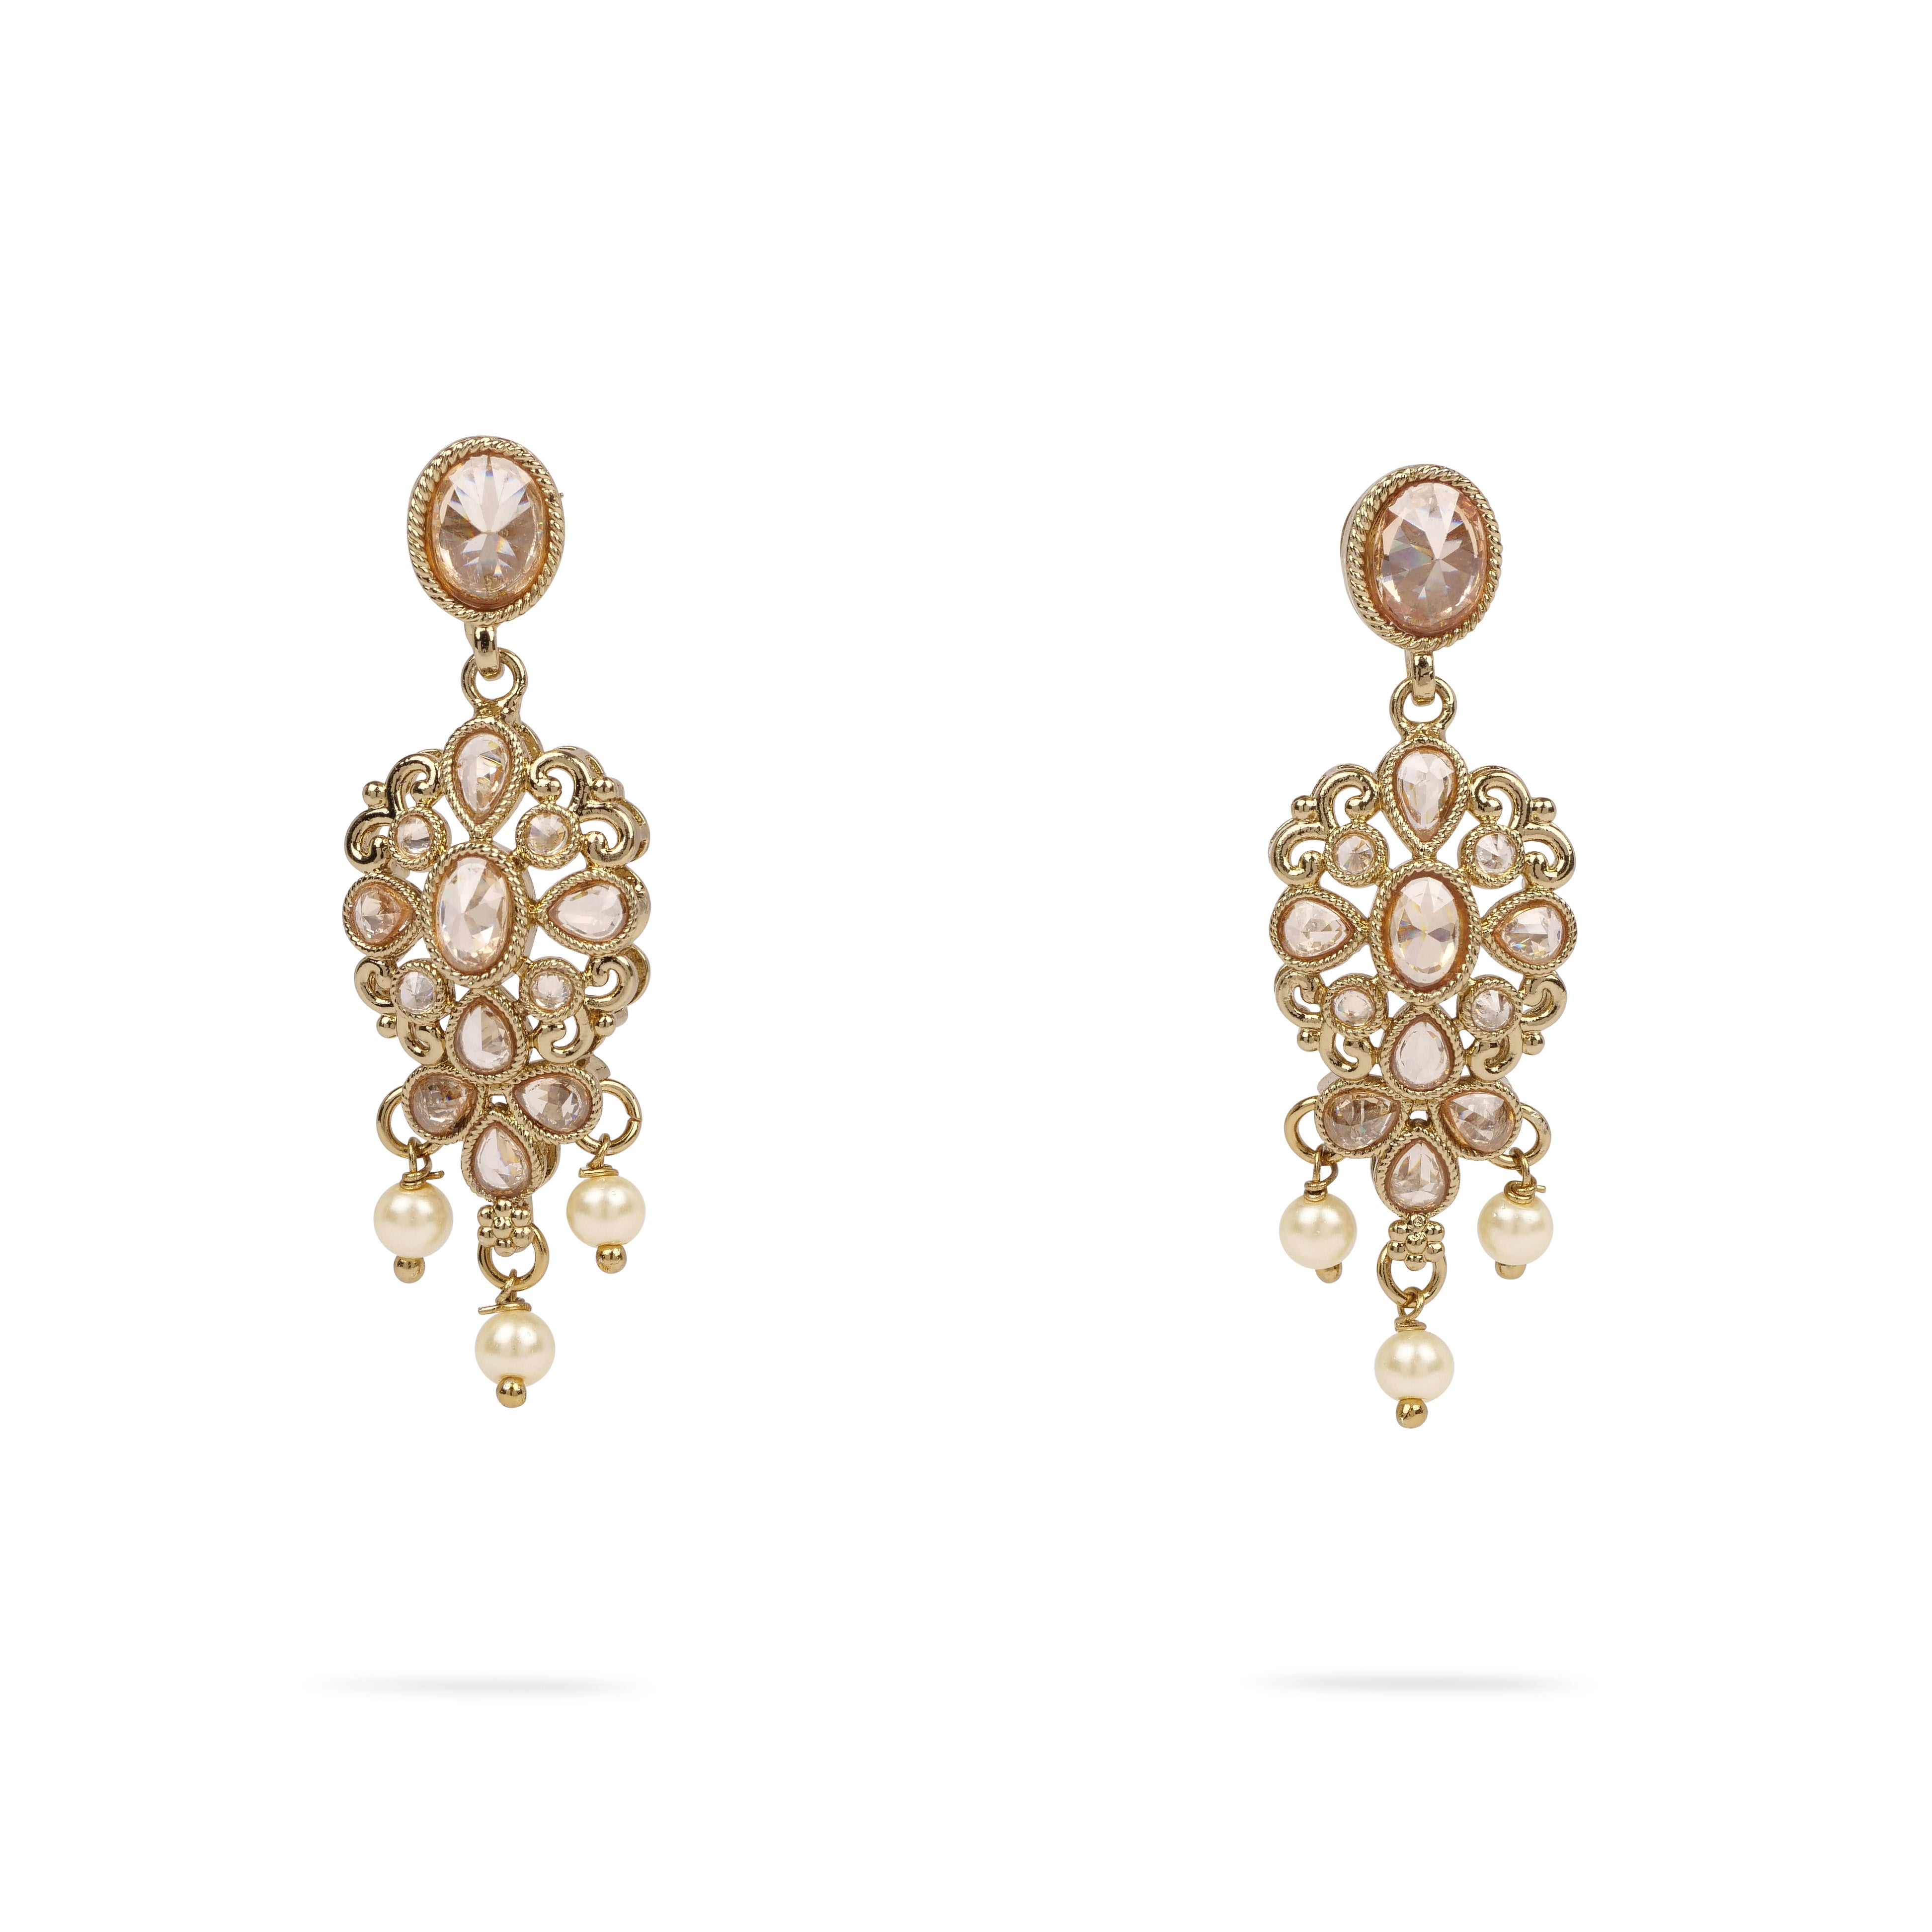 Alina Small Drop Crystal Earrings in Champagne